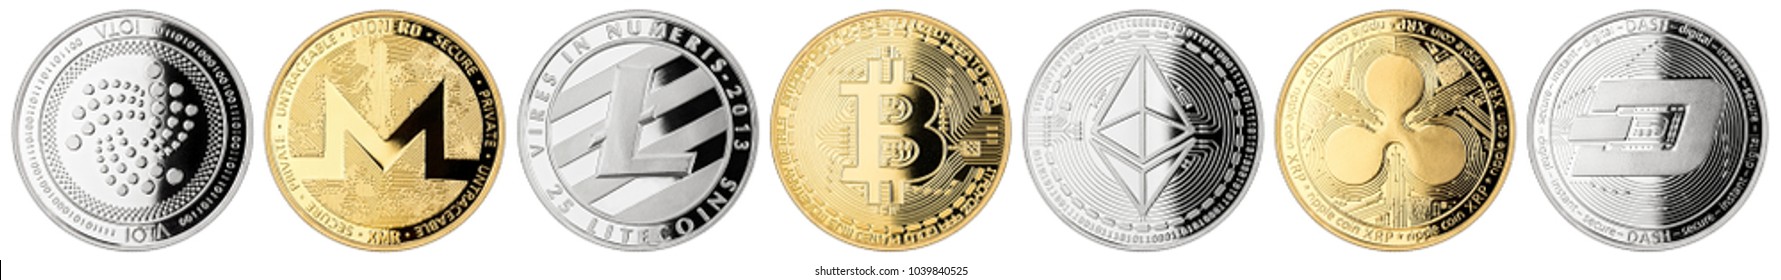 Crypto Currency Coin Set Collection 